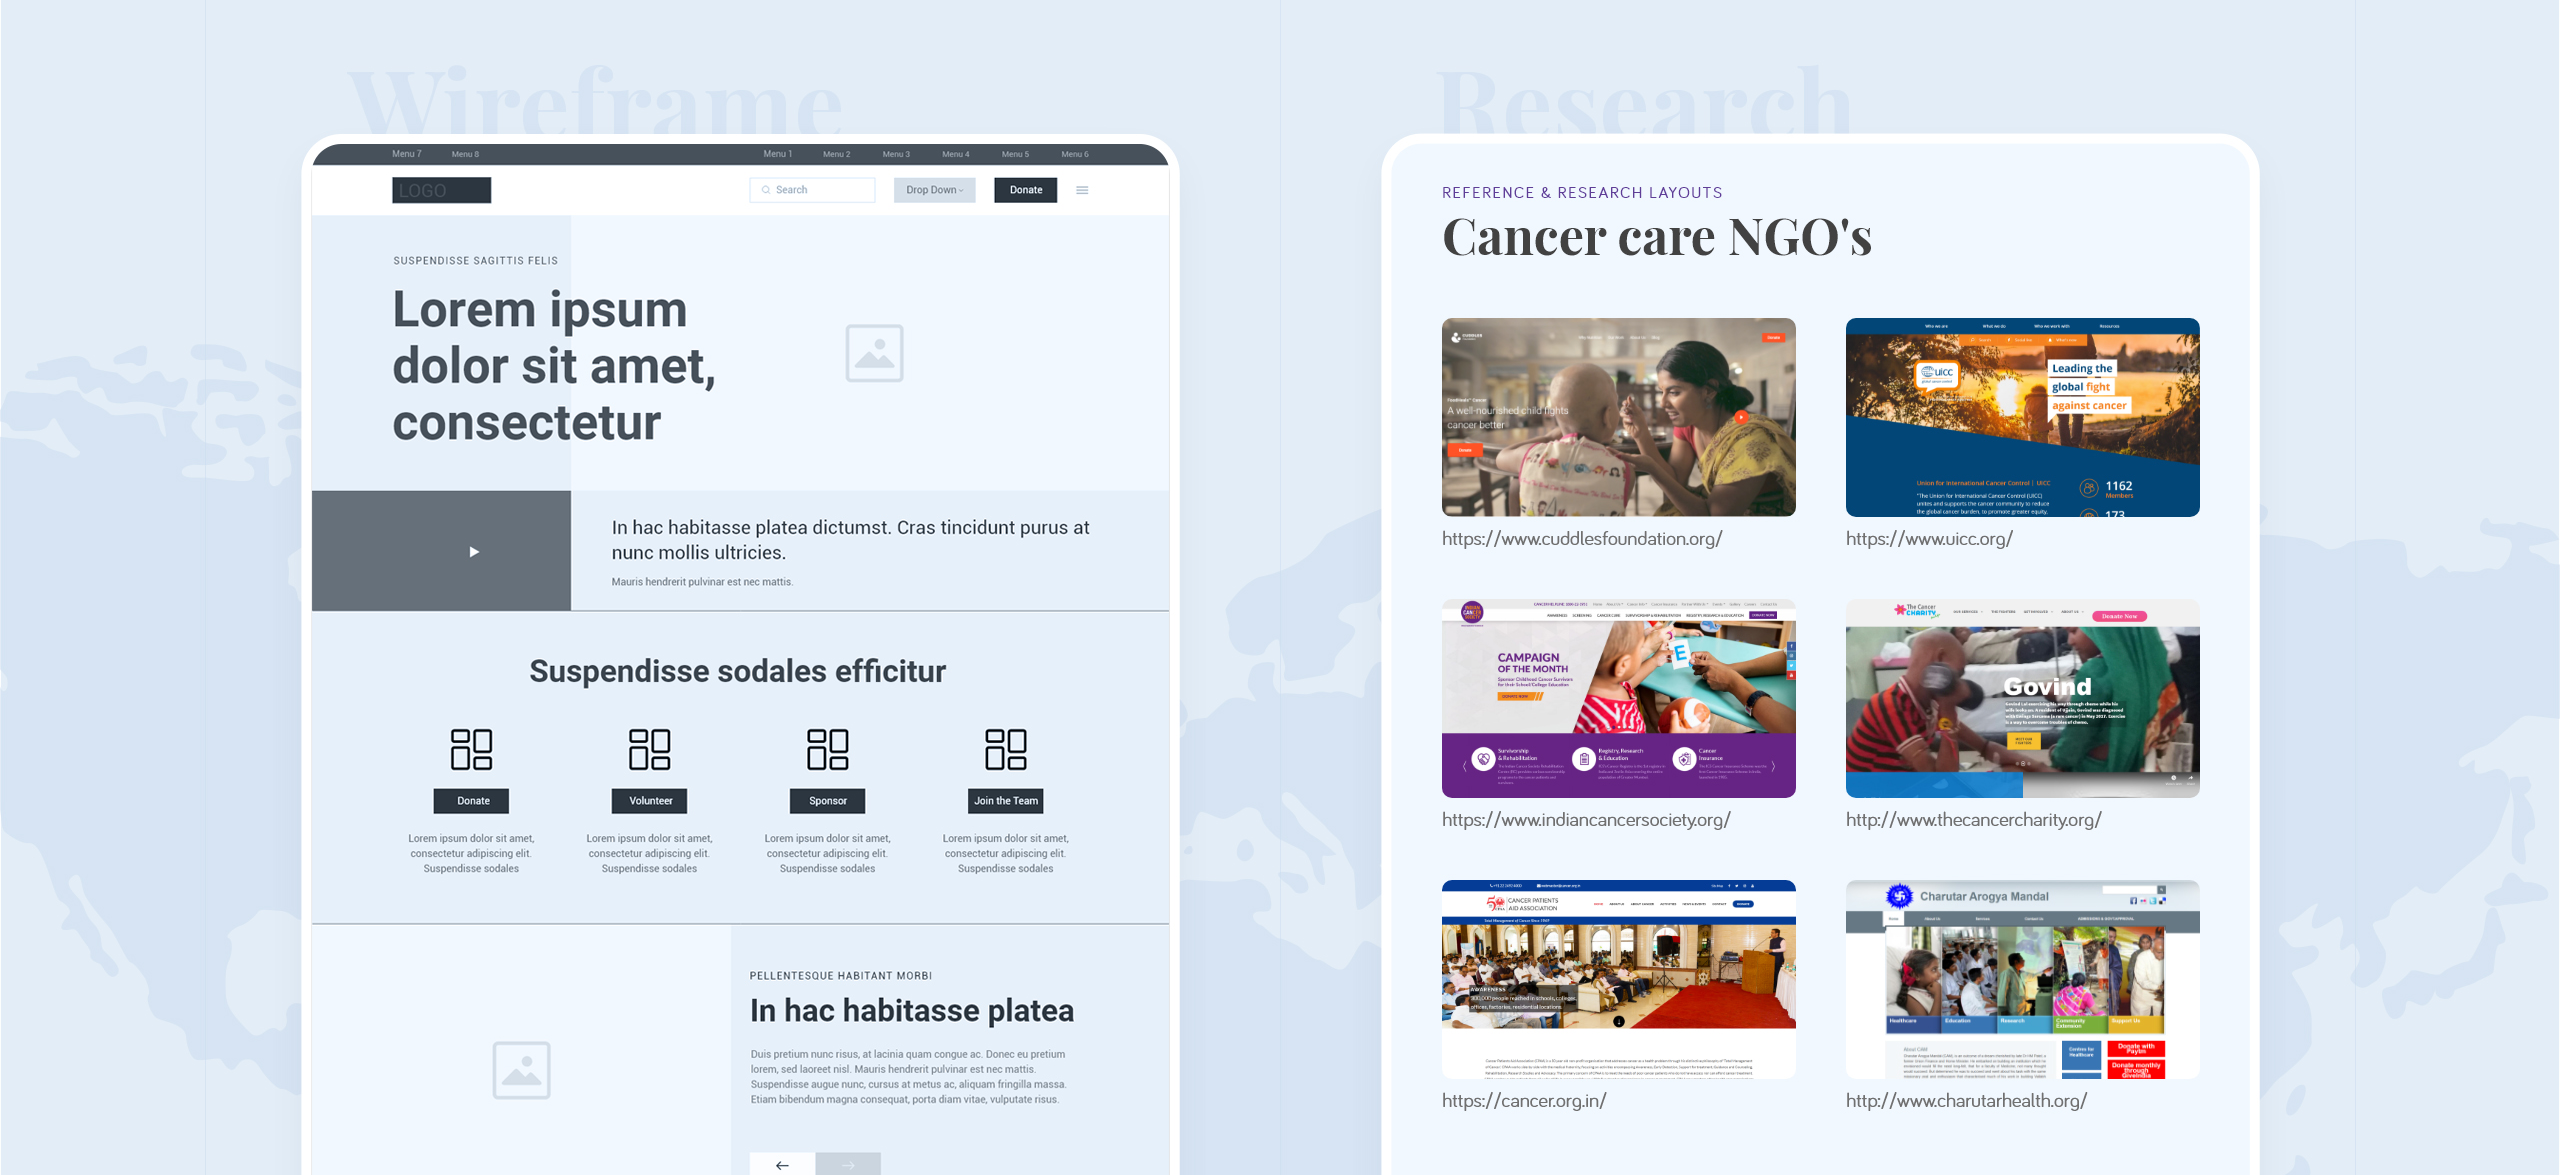 non-governmental organization (NGO) is a non-profit Website UI/UX - Research - FoCP.ae Concept Design - Syed Shahab User Interface and User Experience